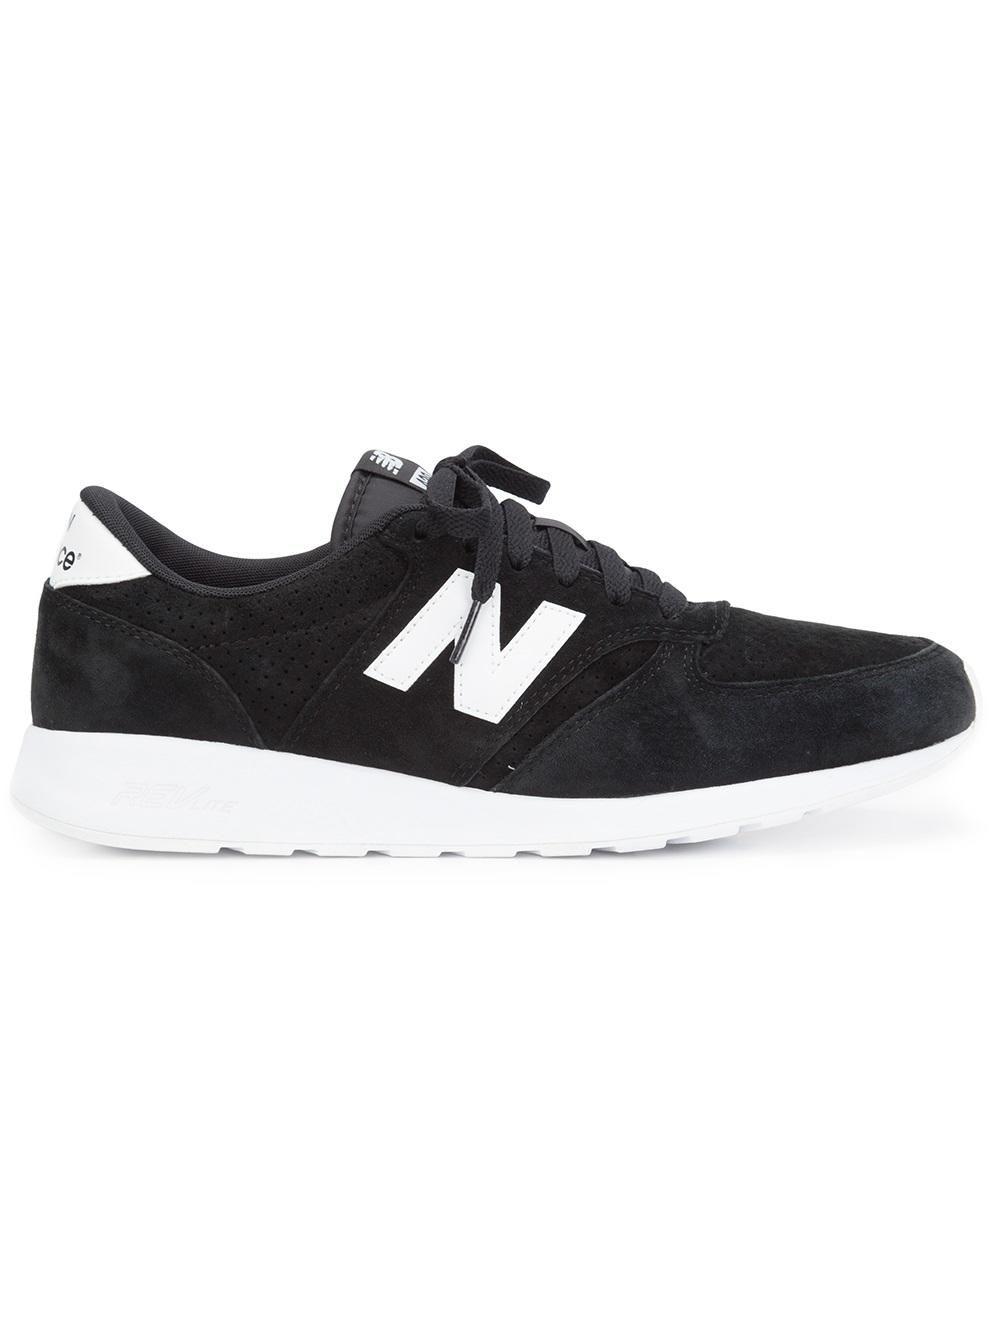 Official New Balance Logo - New Balance logo sneakers Men Shoes,new balance outlet,cheap new ...